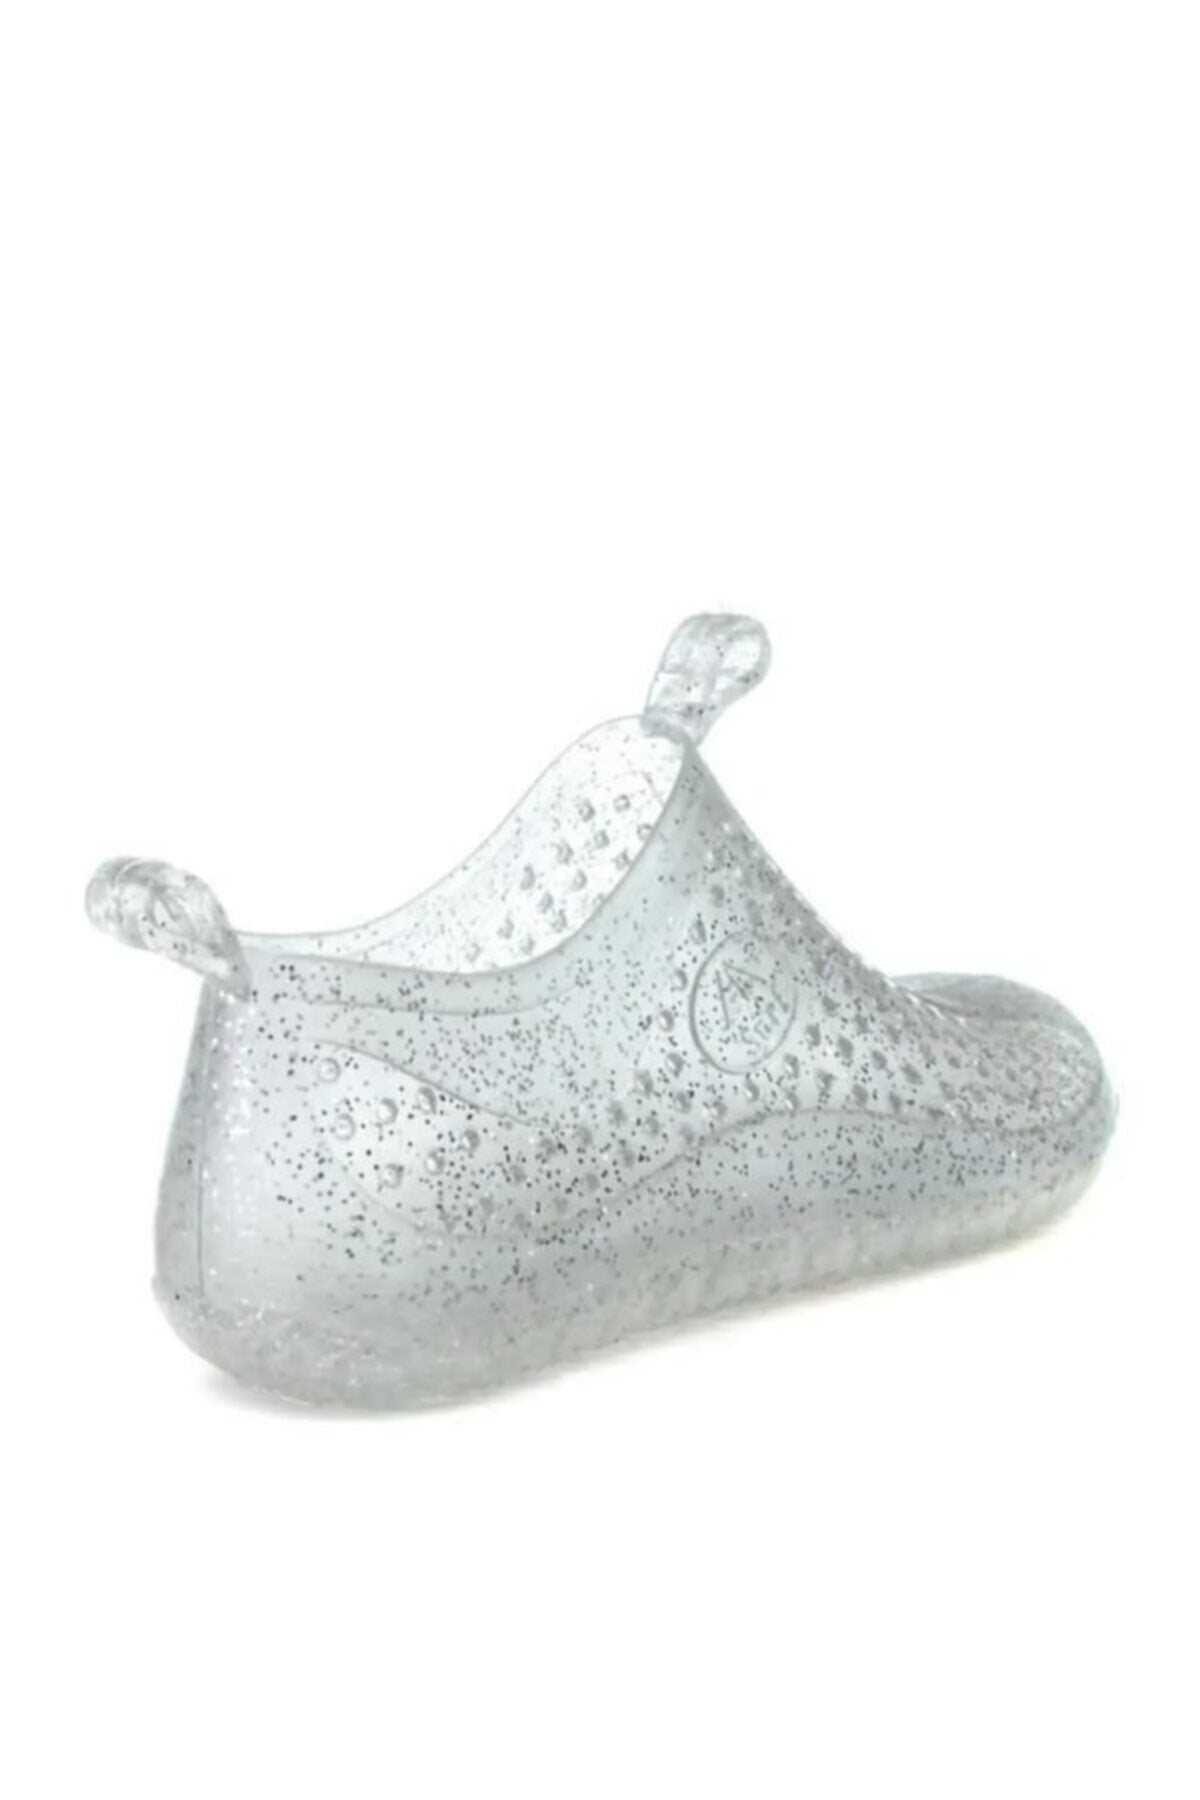 Unisex Transparent Silvery Sea Shoes Casual Stylish Sea Shoes